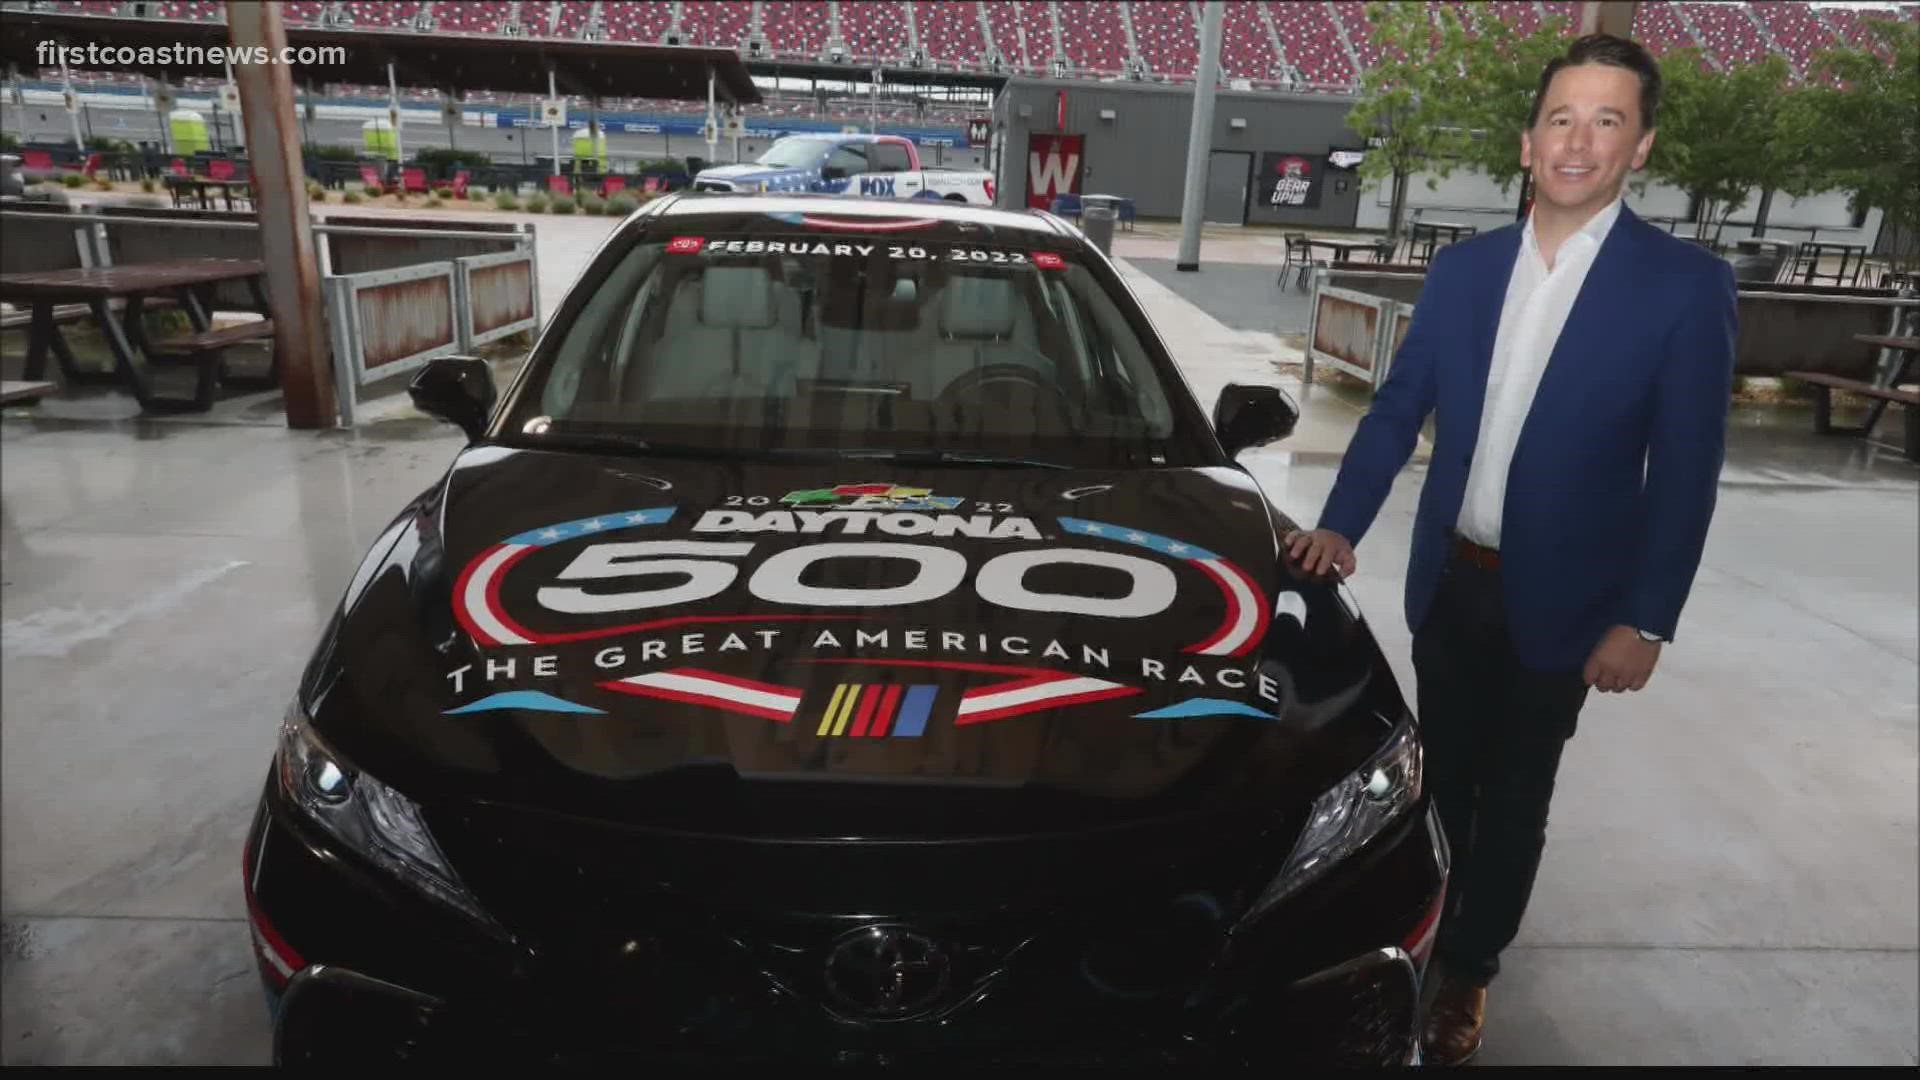 Sports Anchor Mia O'Brien goes one-on-one with the new president of Daytona International Speedway, Frank Kelleher.